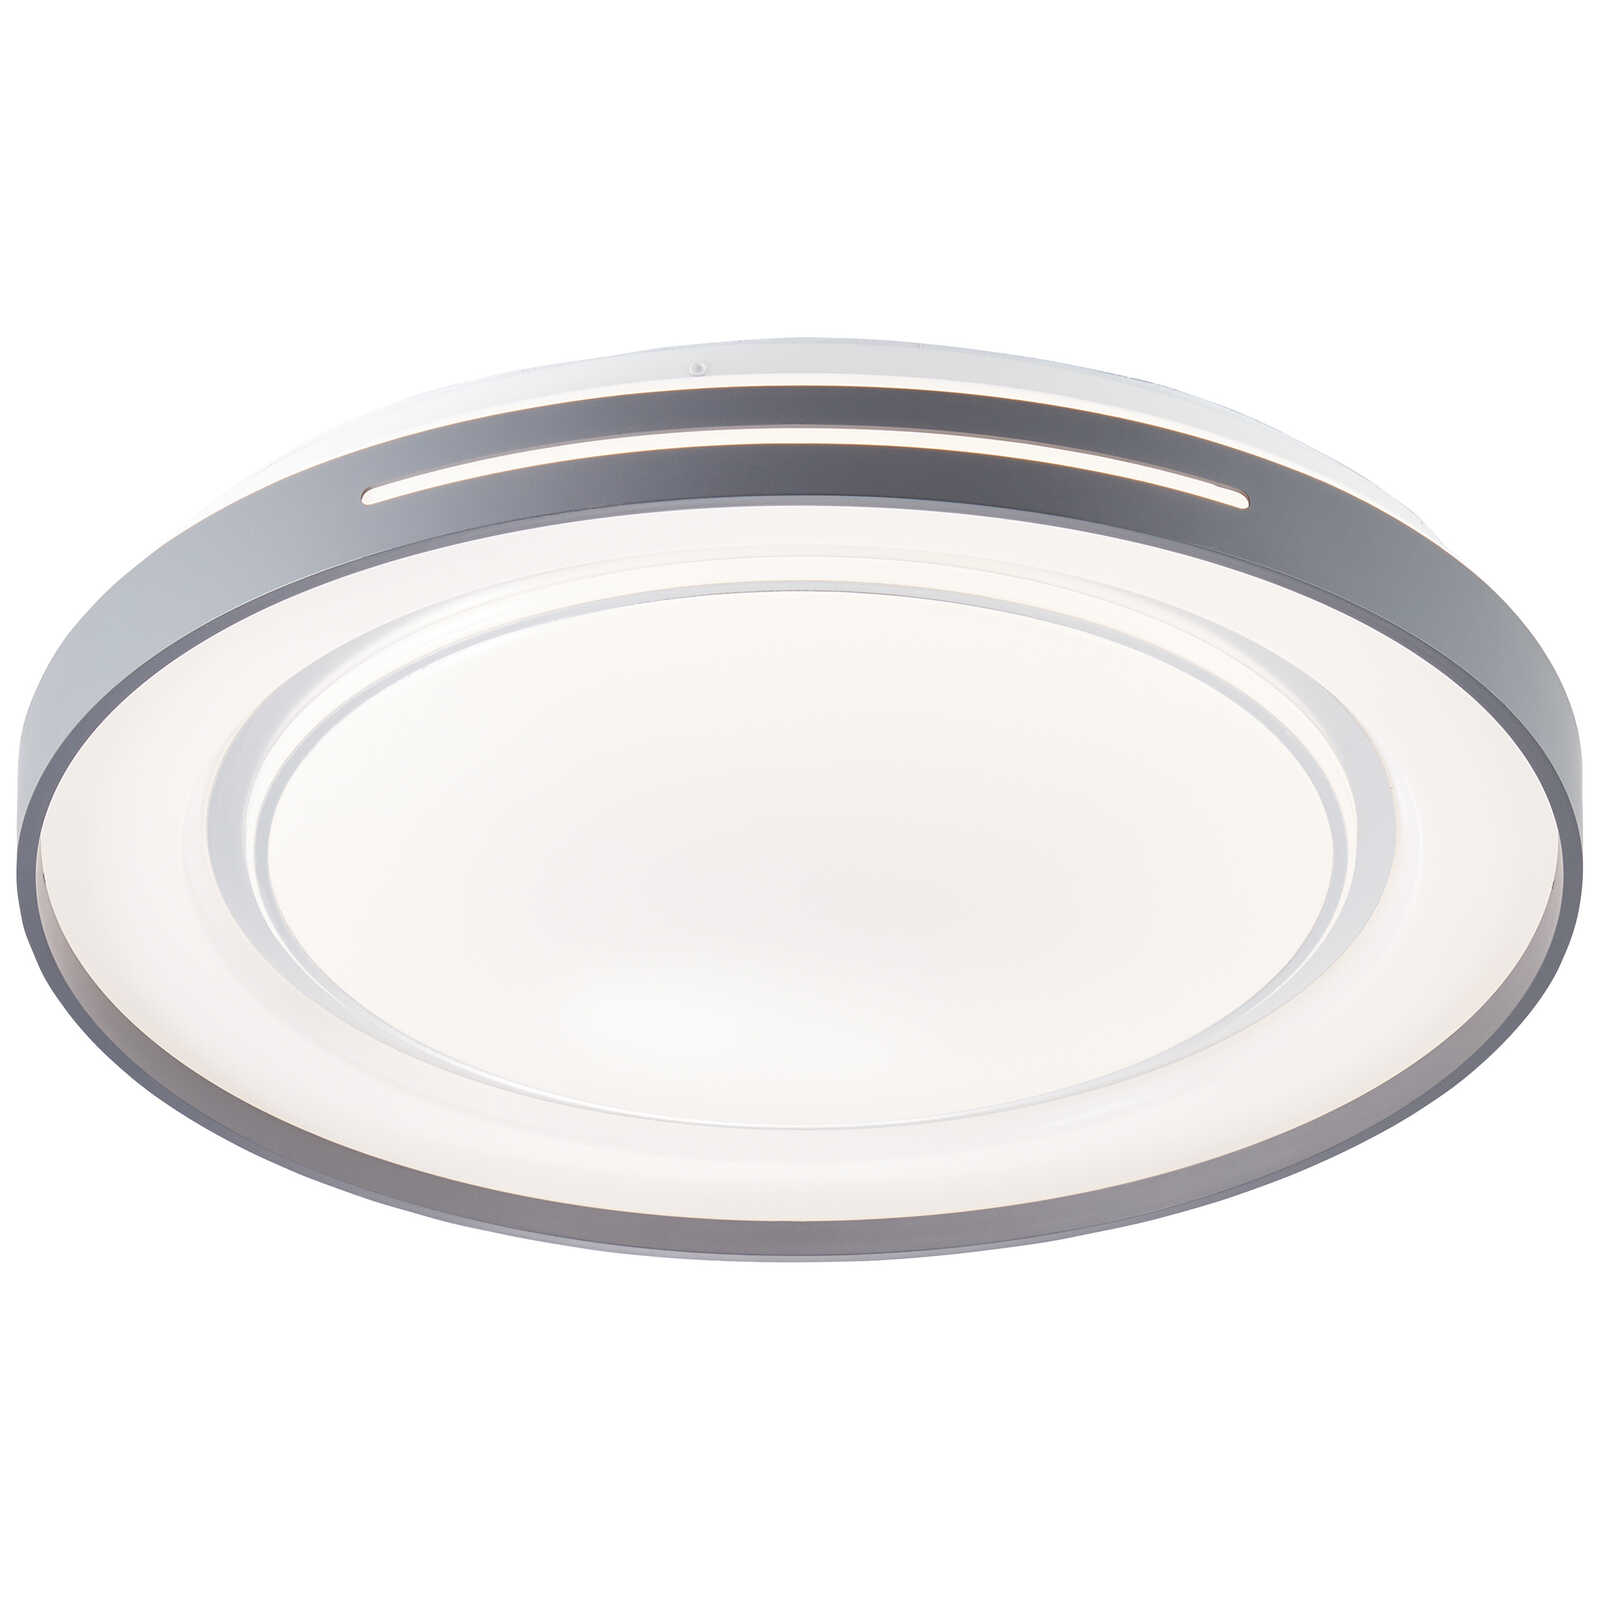             Plastic wall and ceiling light - Aurora 1 - Grey
        